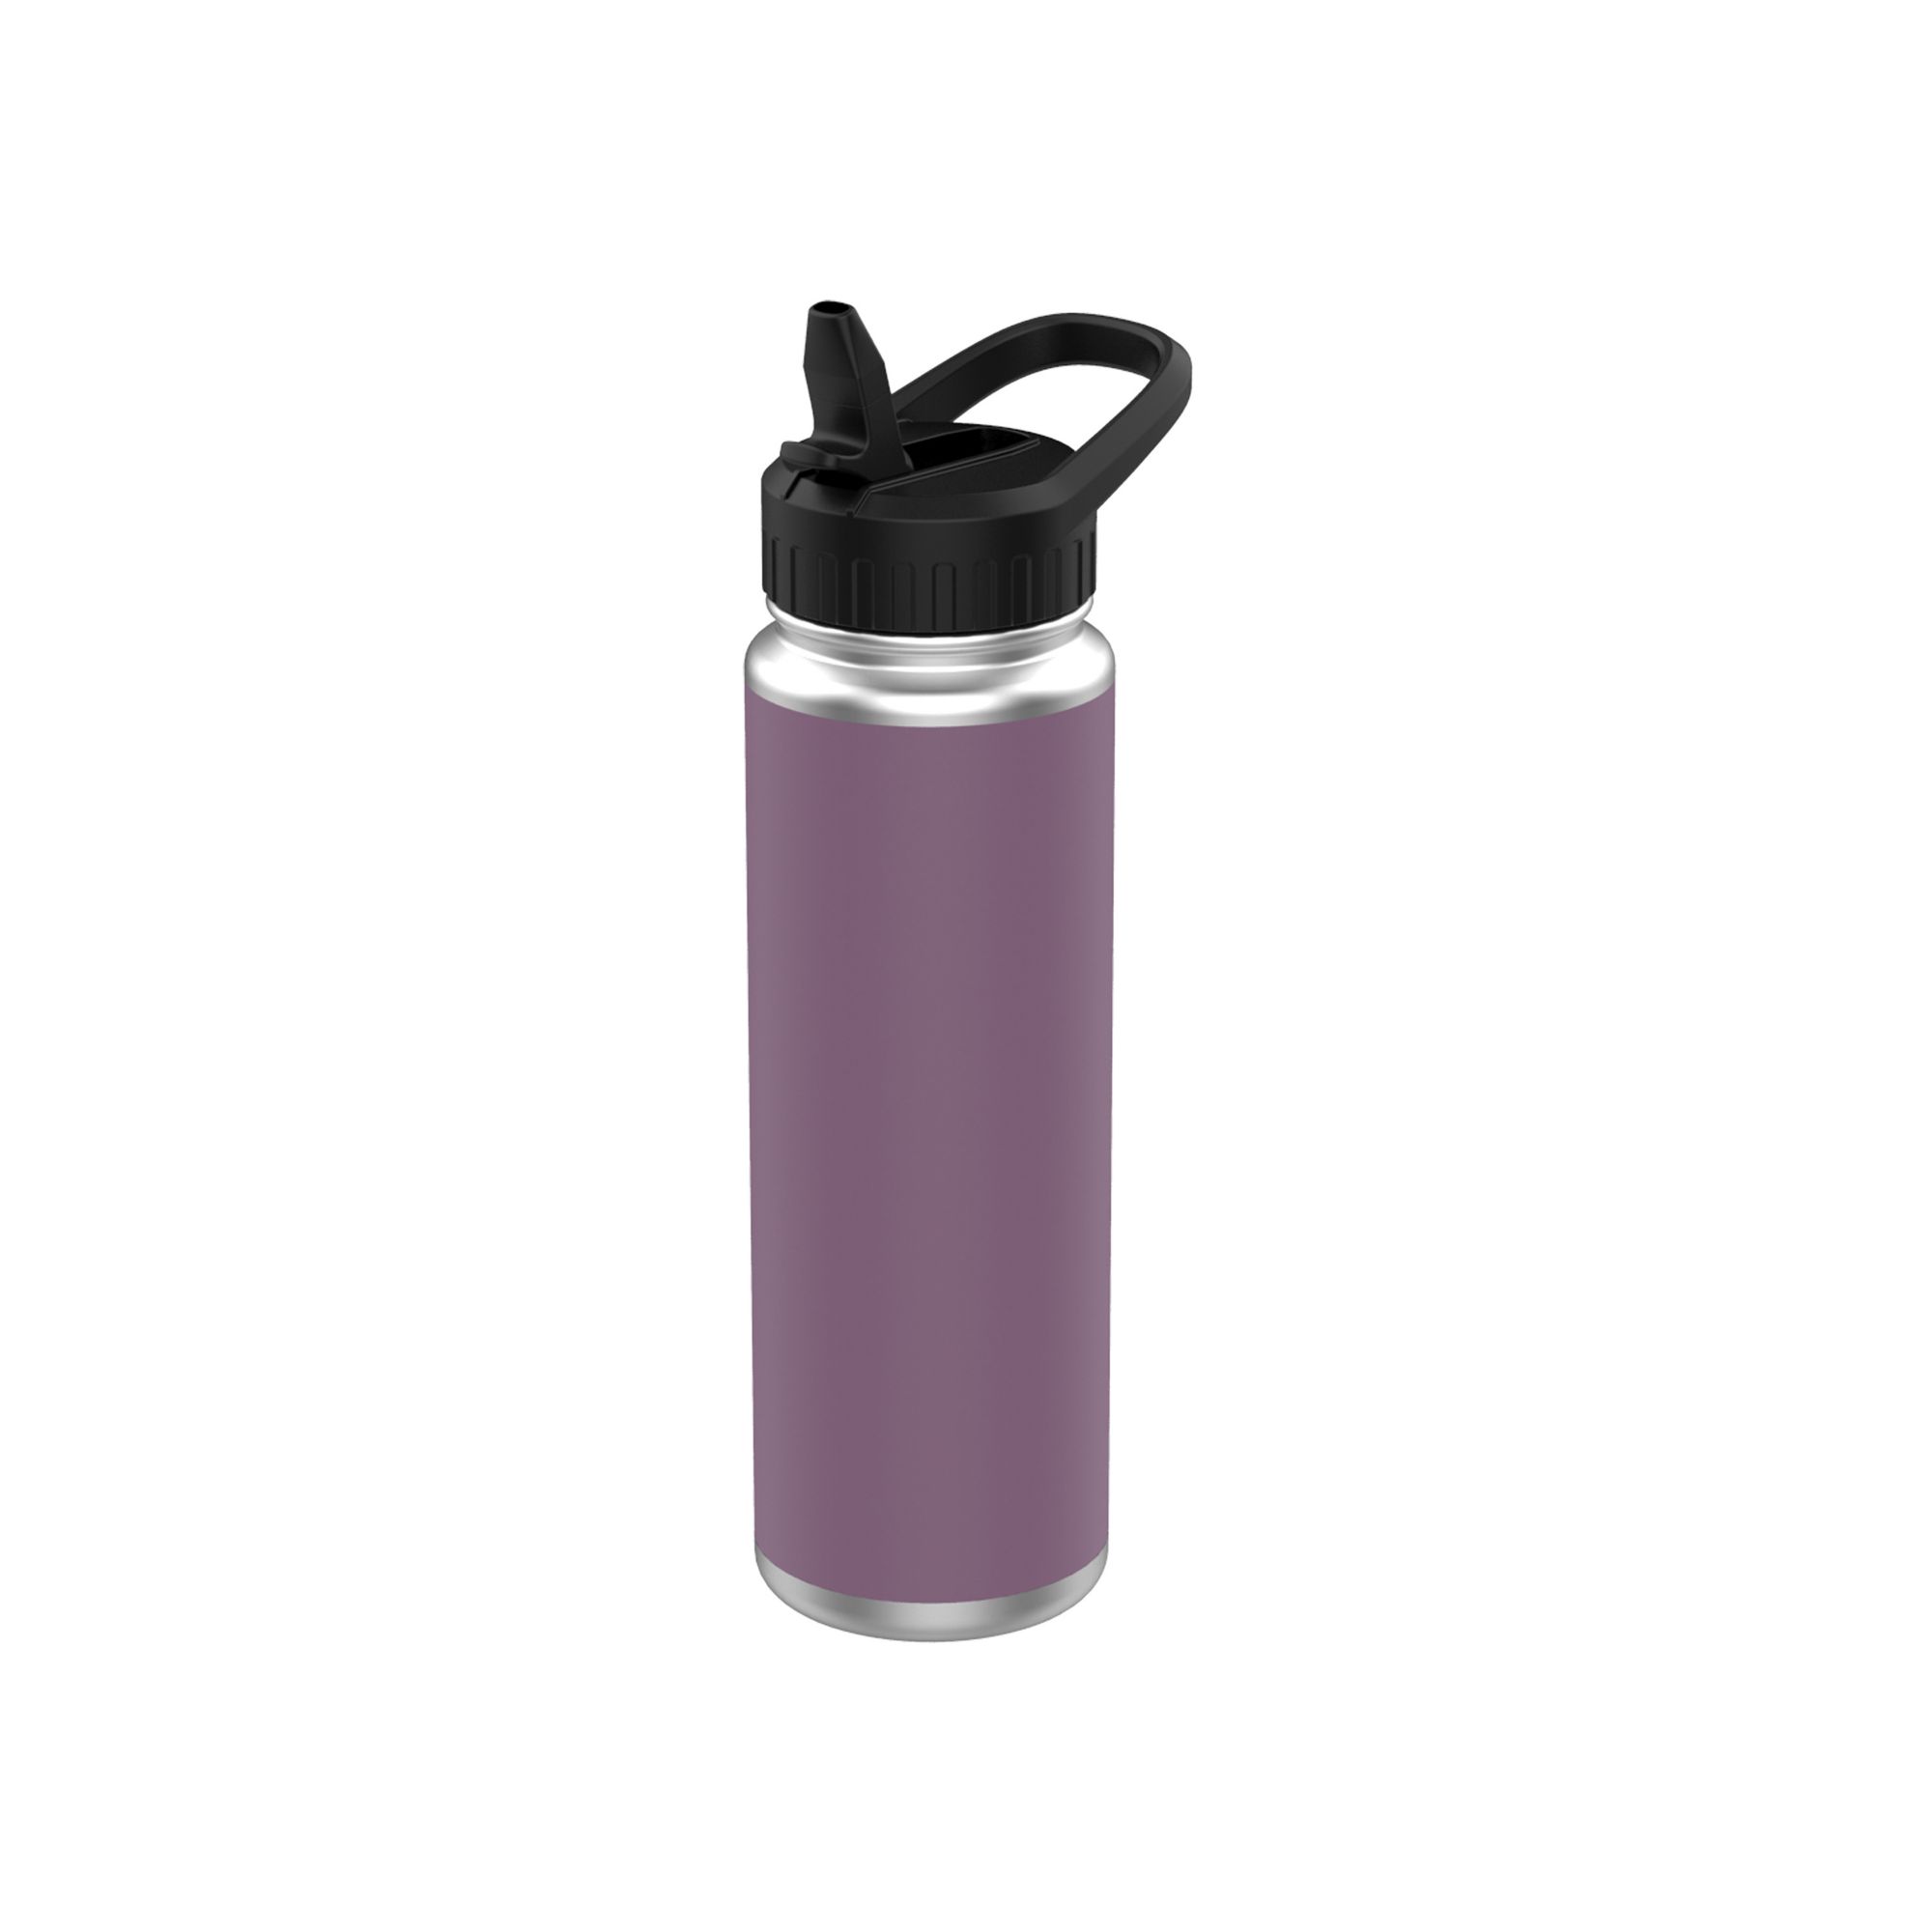  Owala FreeSip Insulated Stainless Steel Water Bottle with Straw  for Sports and Travel, BPA-Free, 24-oz,Purpley : Sports & Outdoors